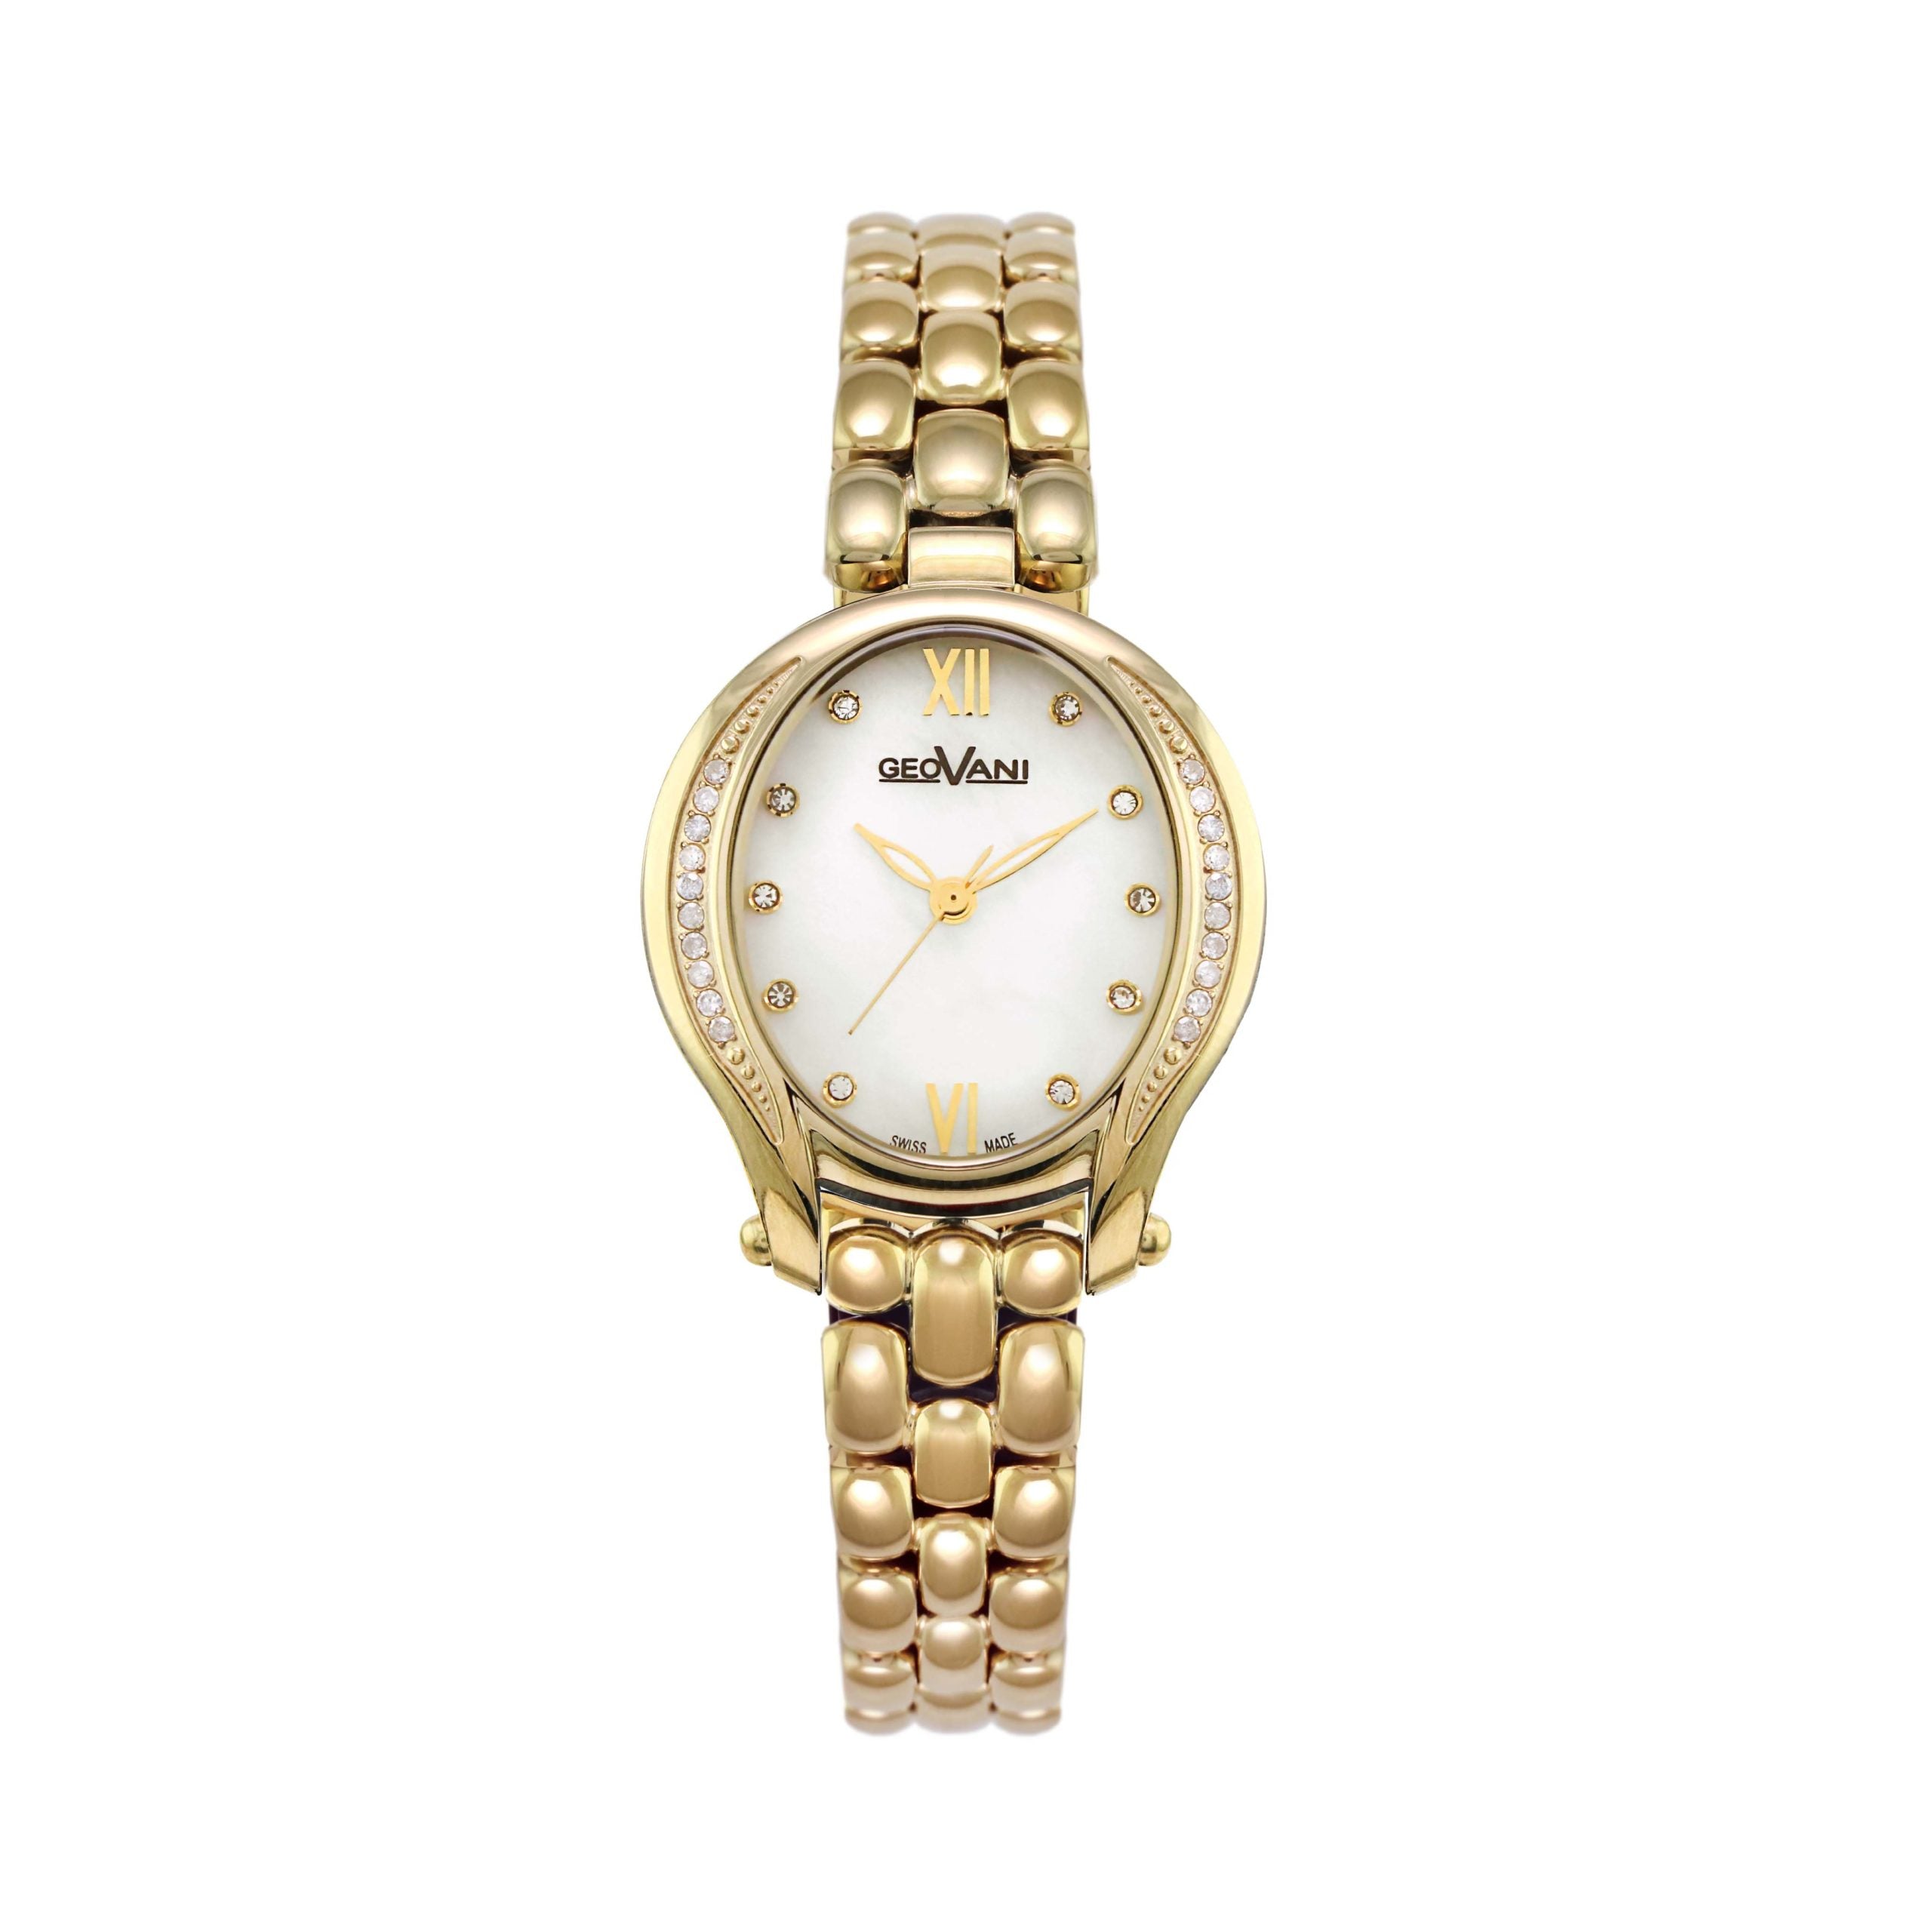 Giovanni Women's Swiss Quartz Watch with Pearly White Dial - GEO-0017